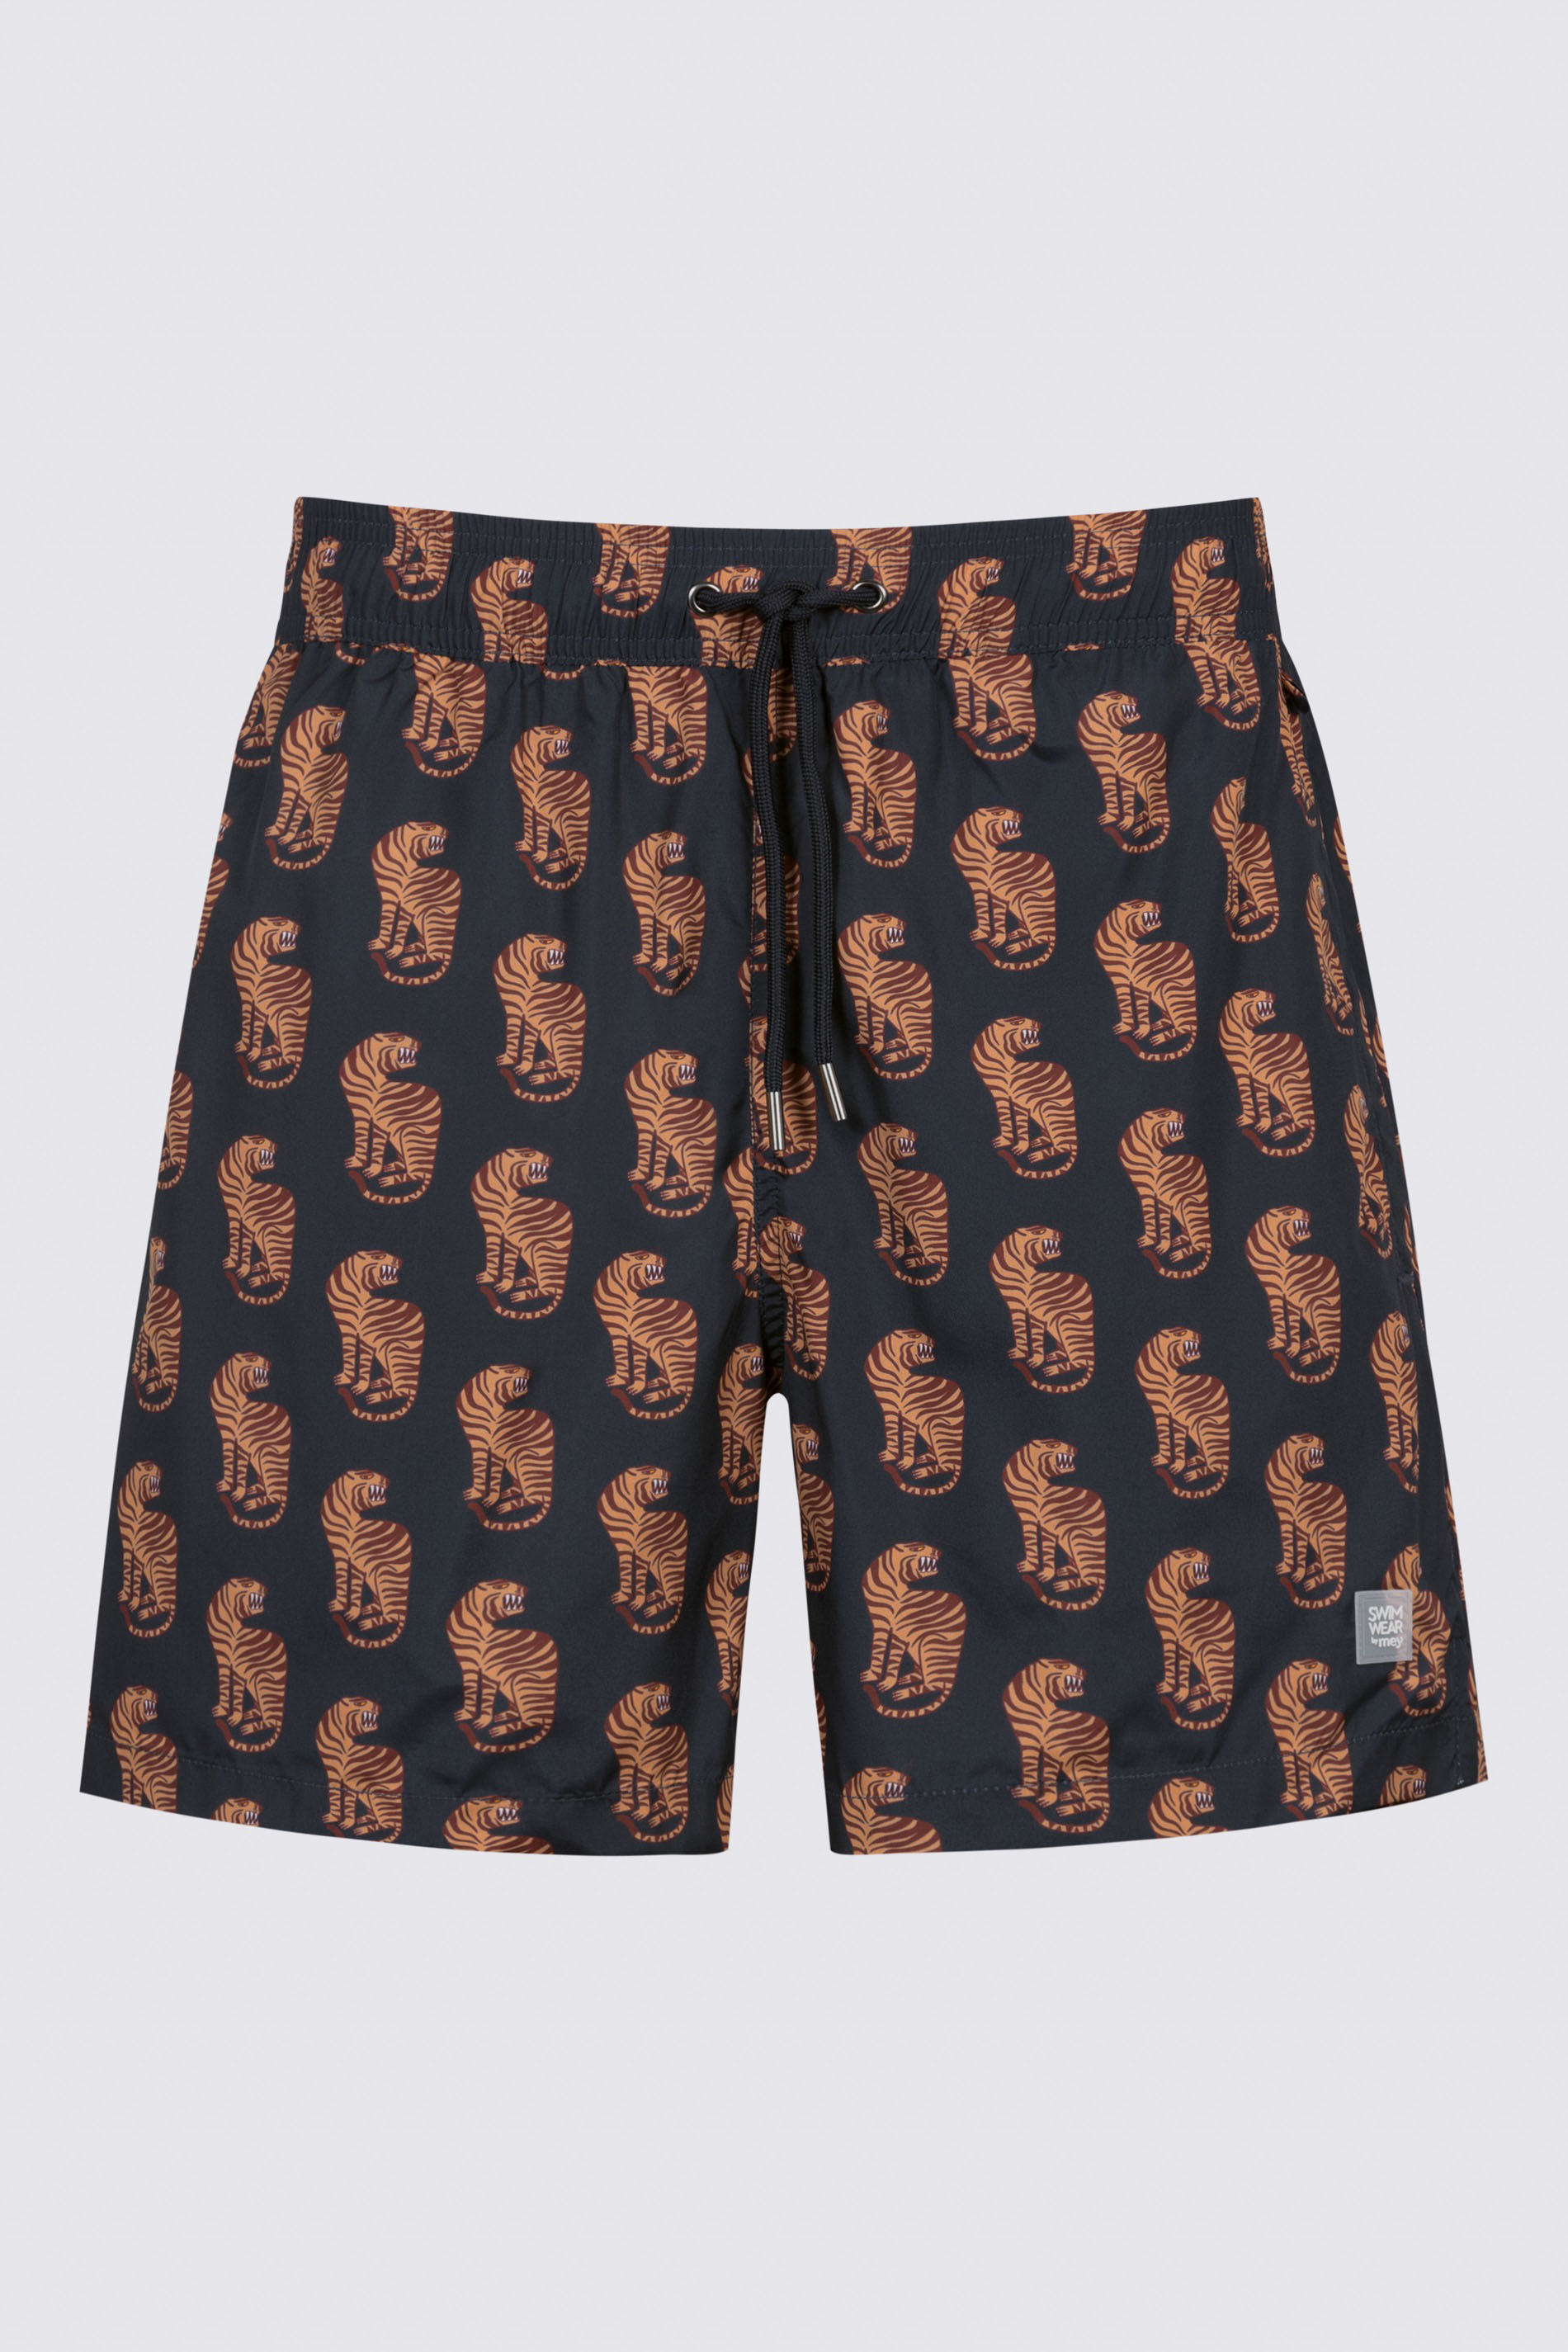 Zwemshorts Serie Tiger Uitknippen | mey®